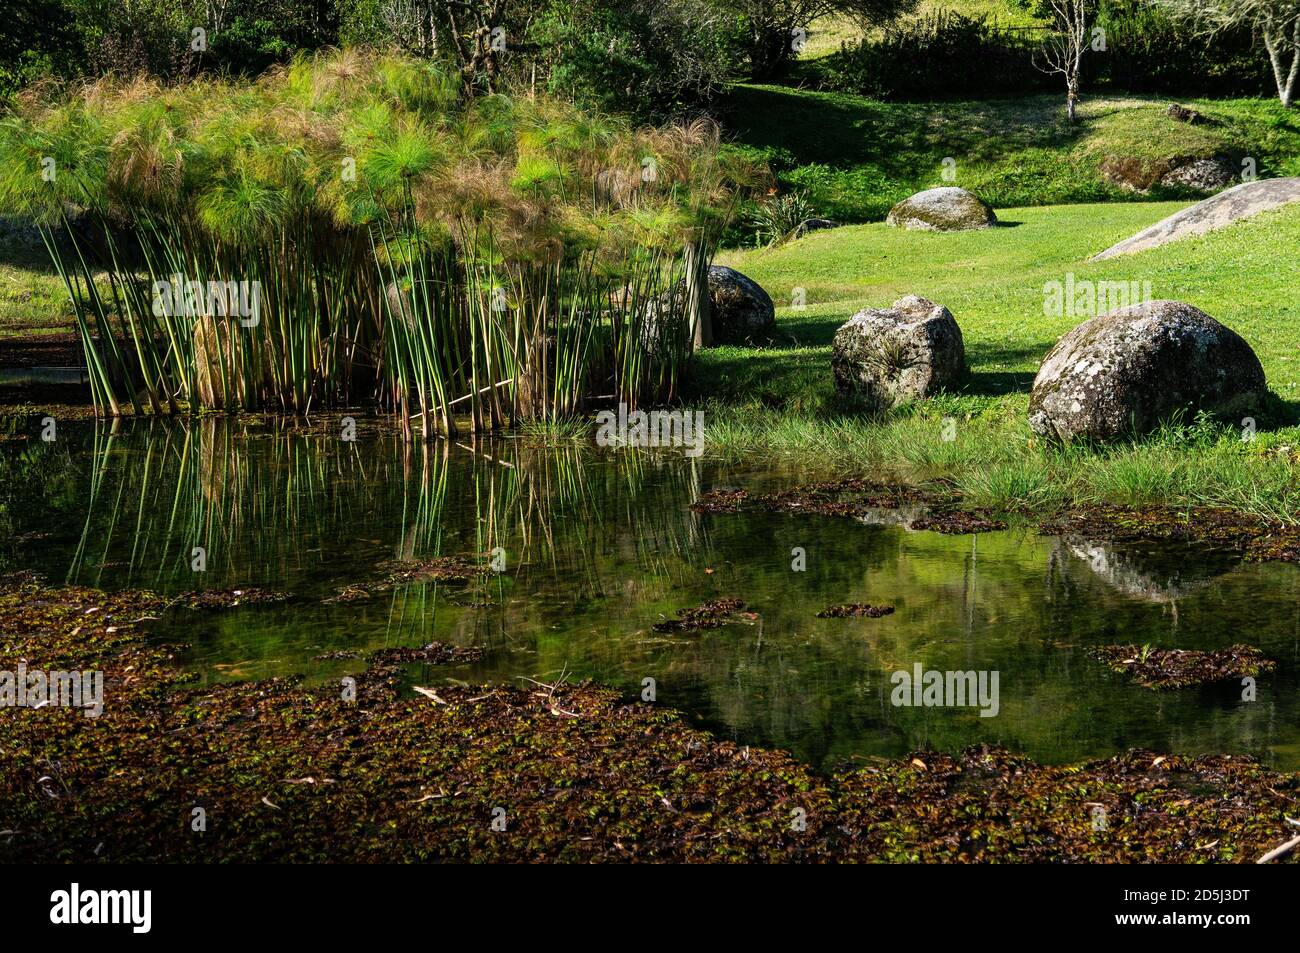 A small lake covered with water plants nearby some bamboo with green vegetation and rocks in Cunha, Sao Paulo - Brazil. Stock Photo